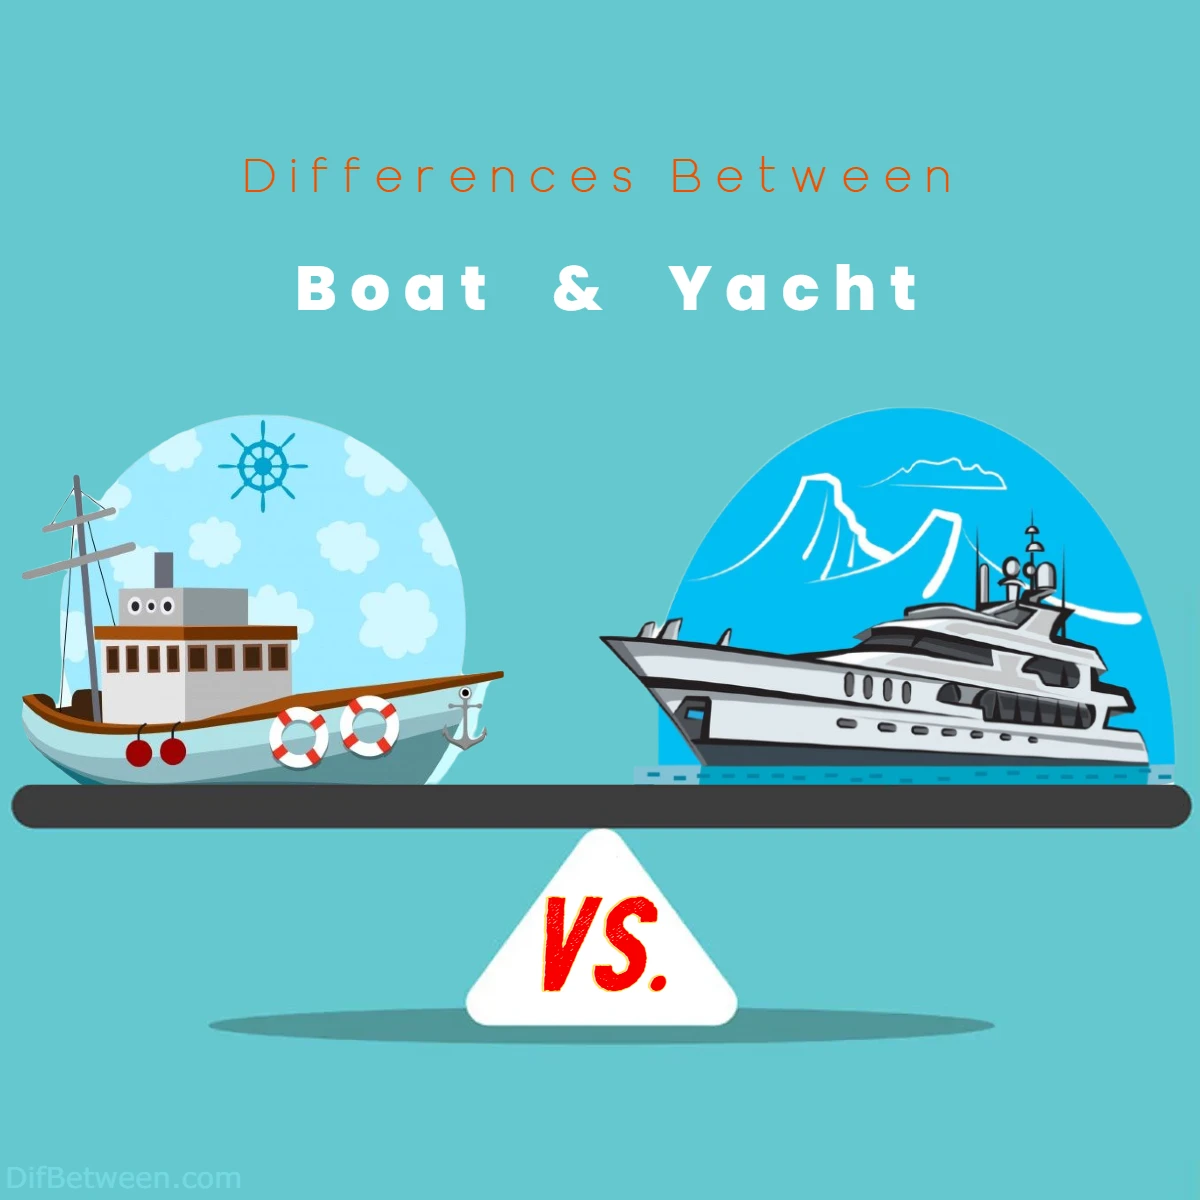 Differences Between Boat vs Yacht